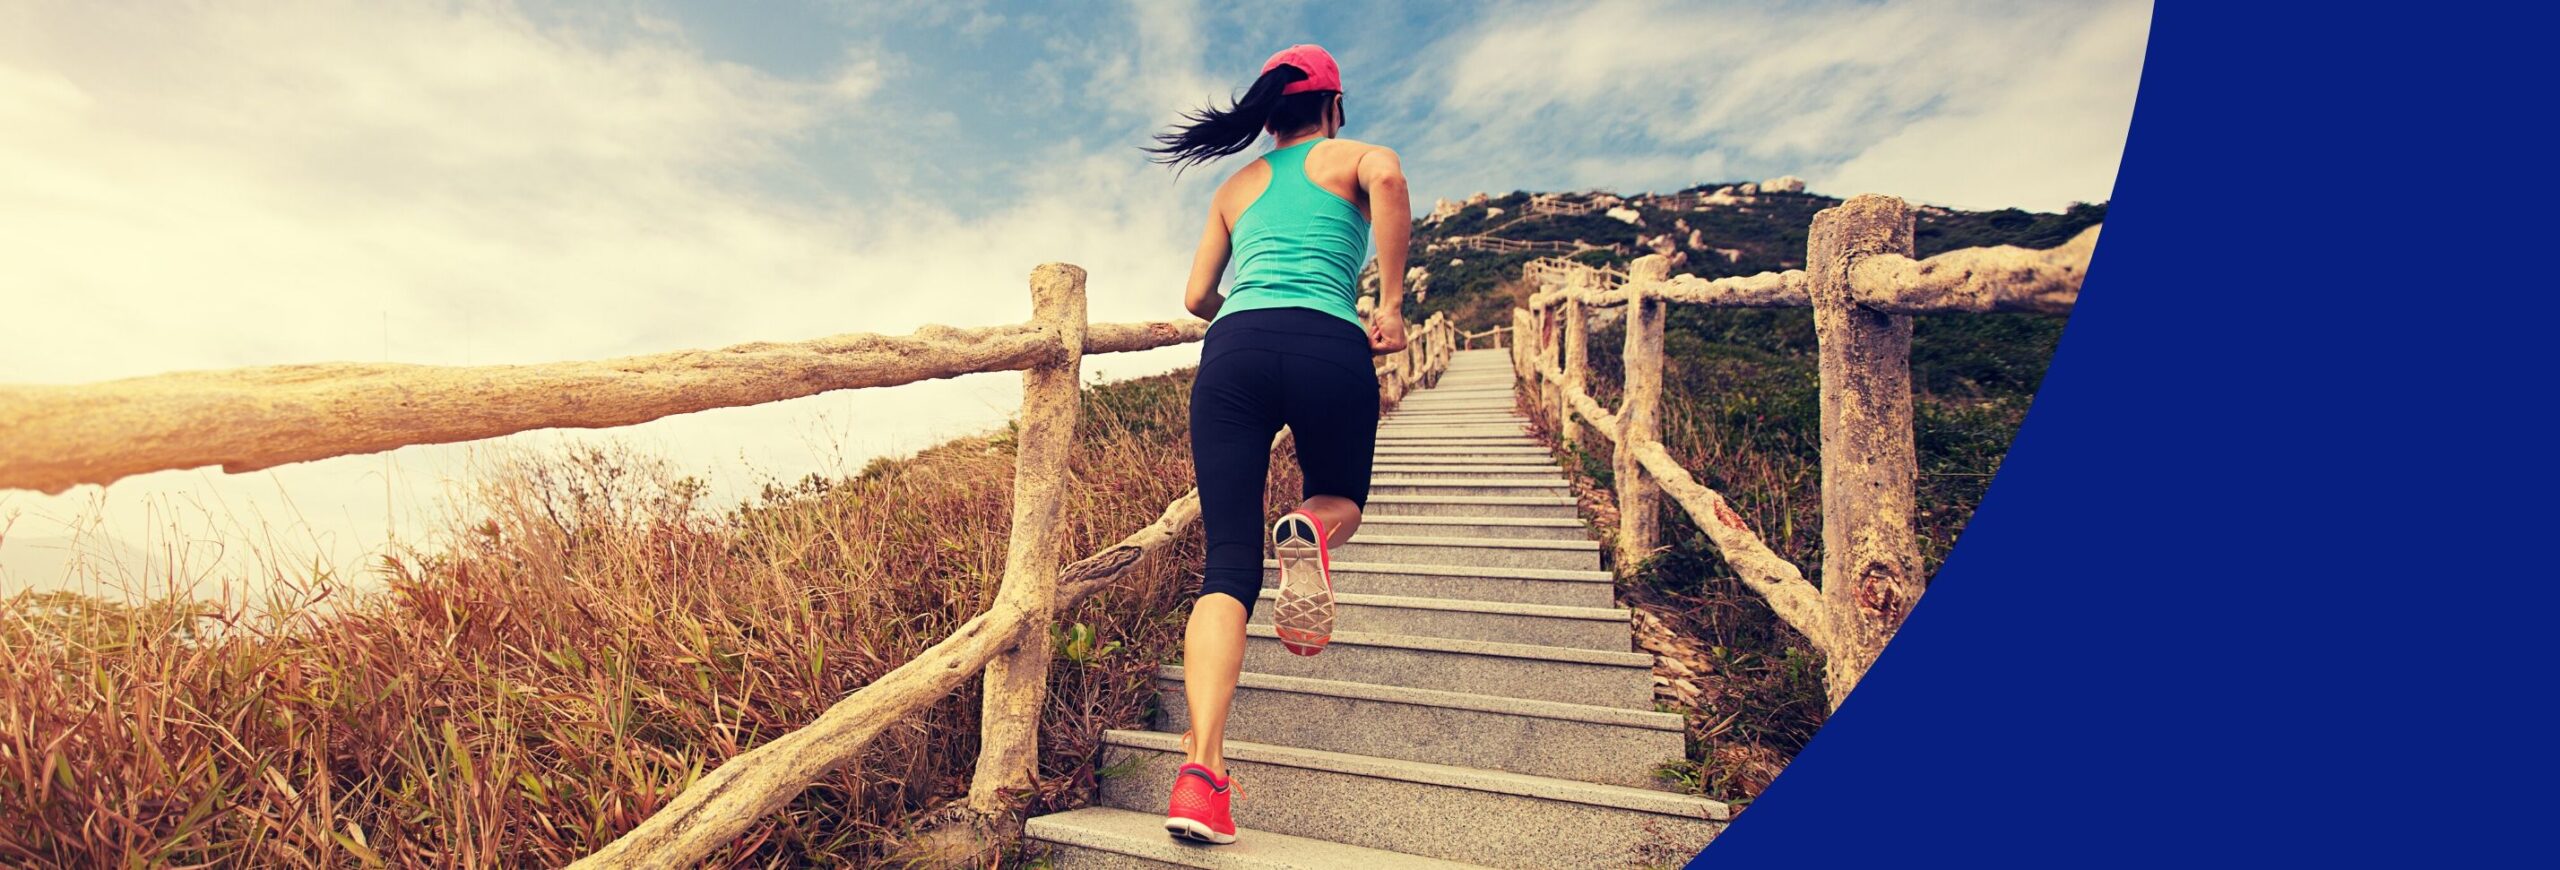 Image shows a woman climbing outdoor stairs in fitness clothes.